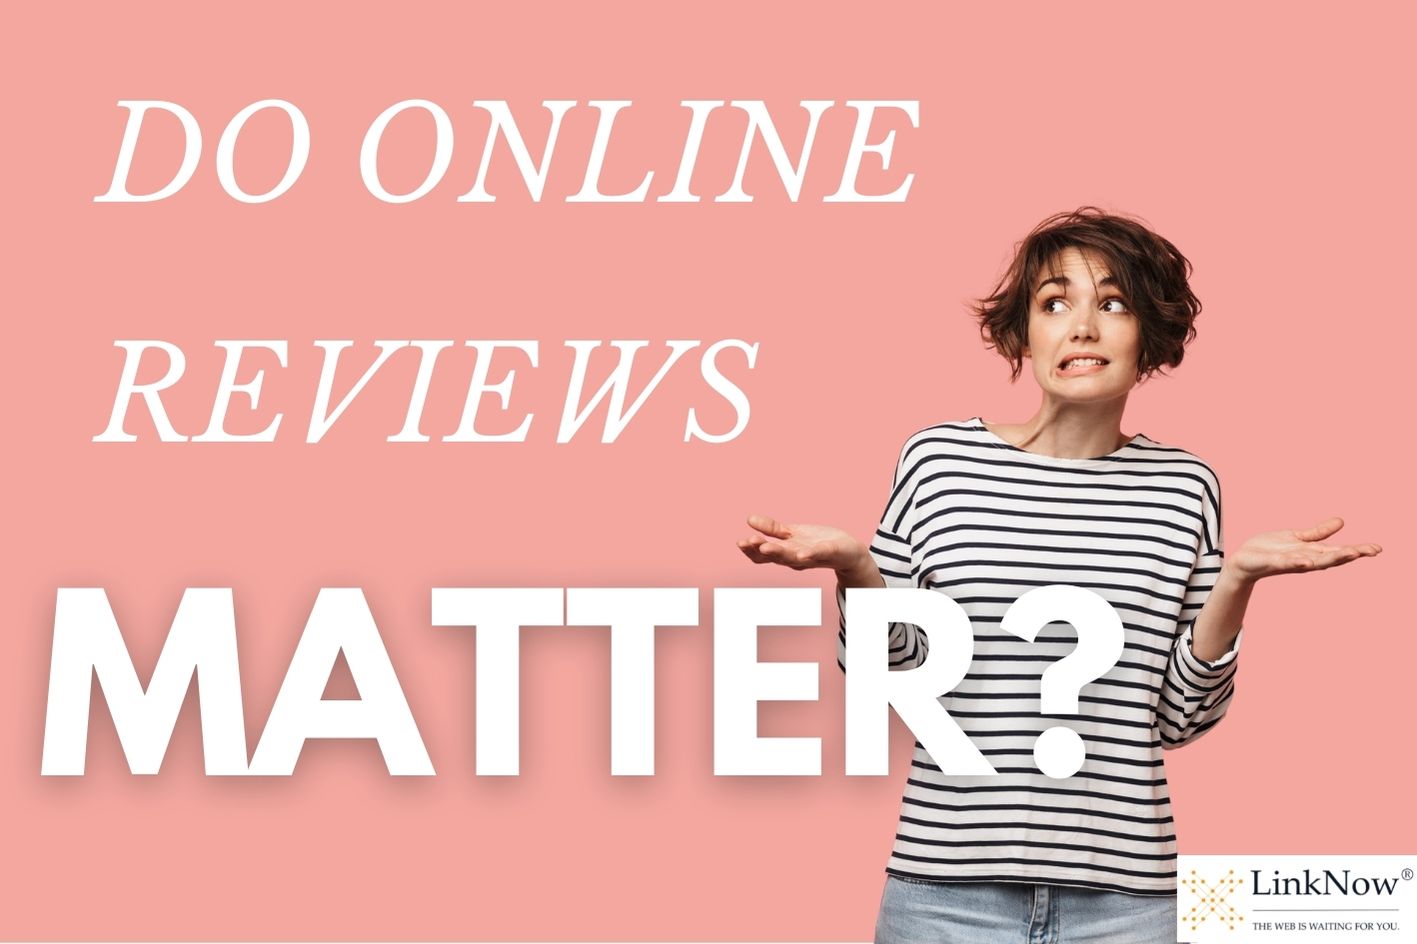 Woman raises arms in confusion. Text says: Do online reviews matter?